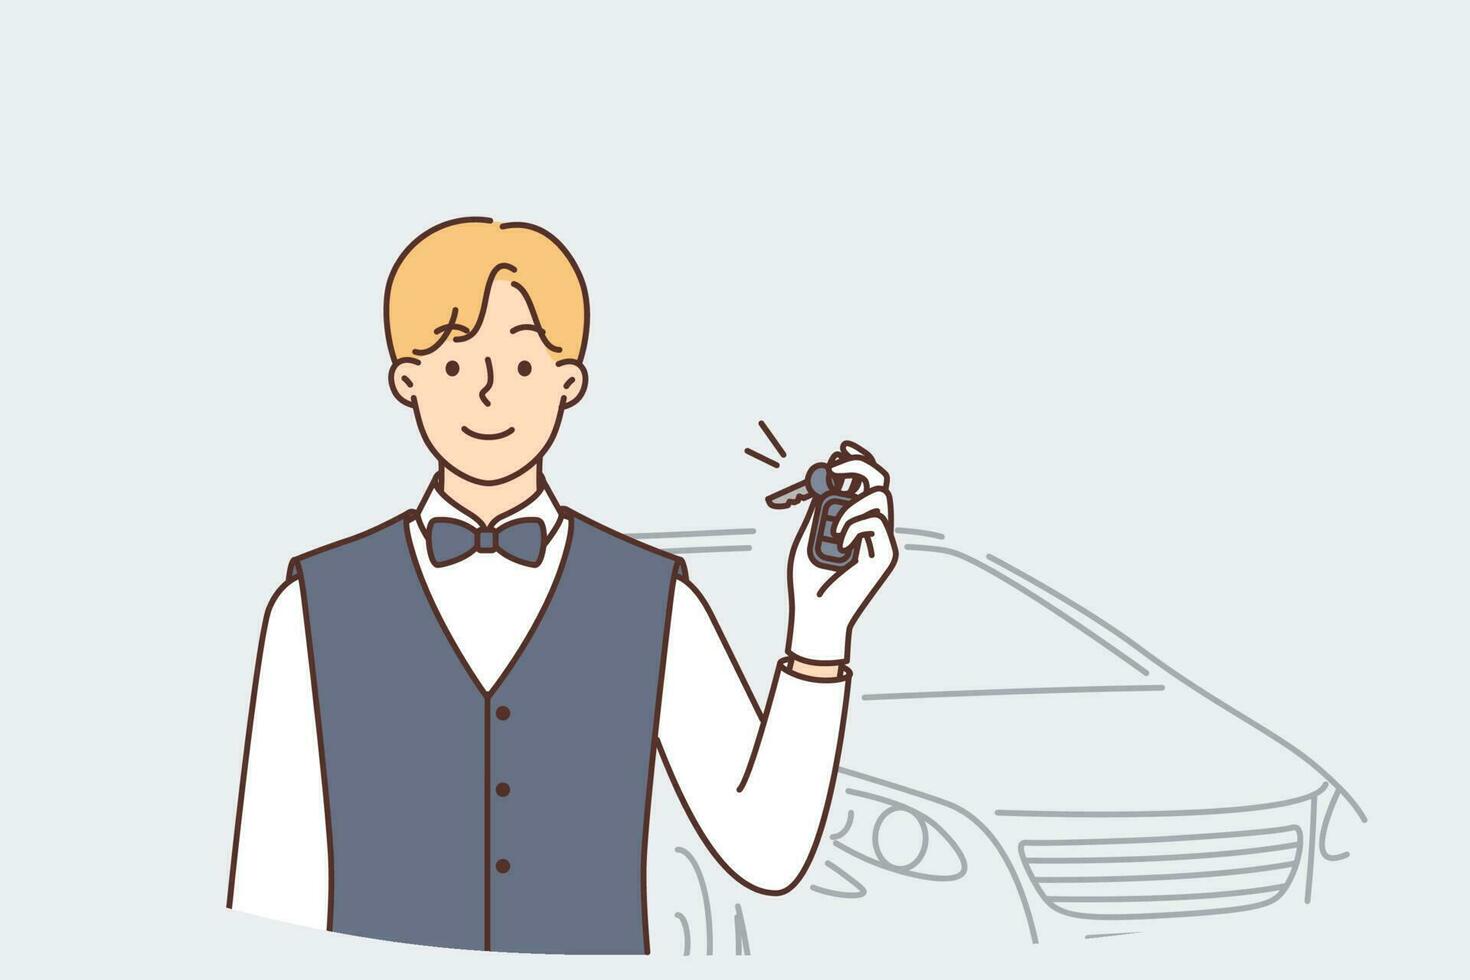 Man butler holding car keys offering to park automobile at event with vip guests. Young guy working as valet or bellboy in luxury hotel looks at camera and holds out keys to sedan car vector